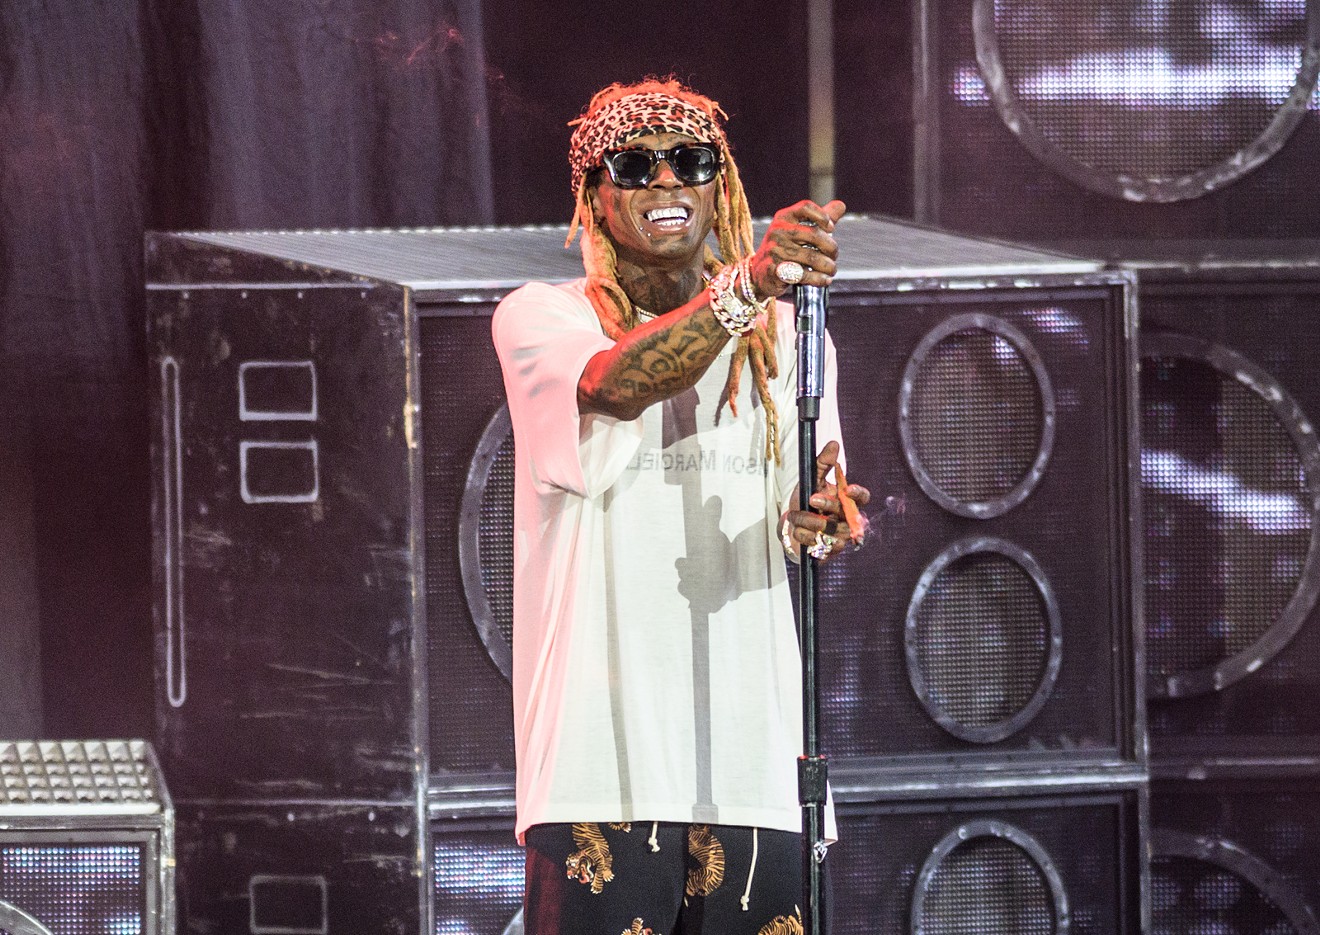 Weezy listening: Lil Wayne plays Wednesday night at House of Blues.